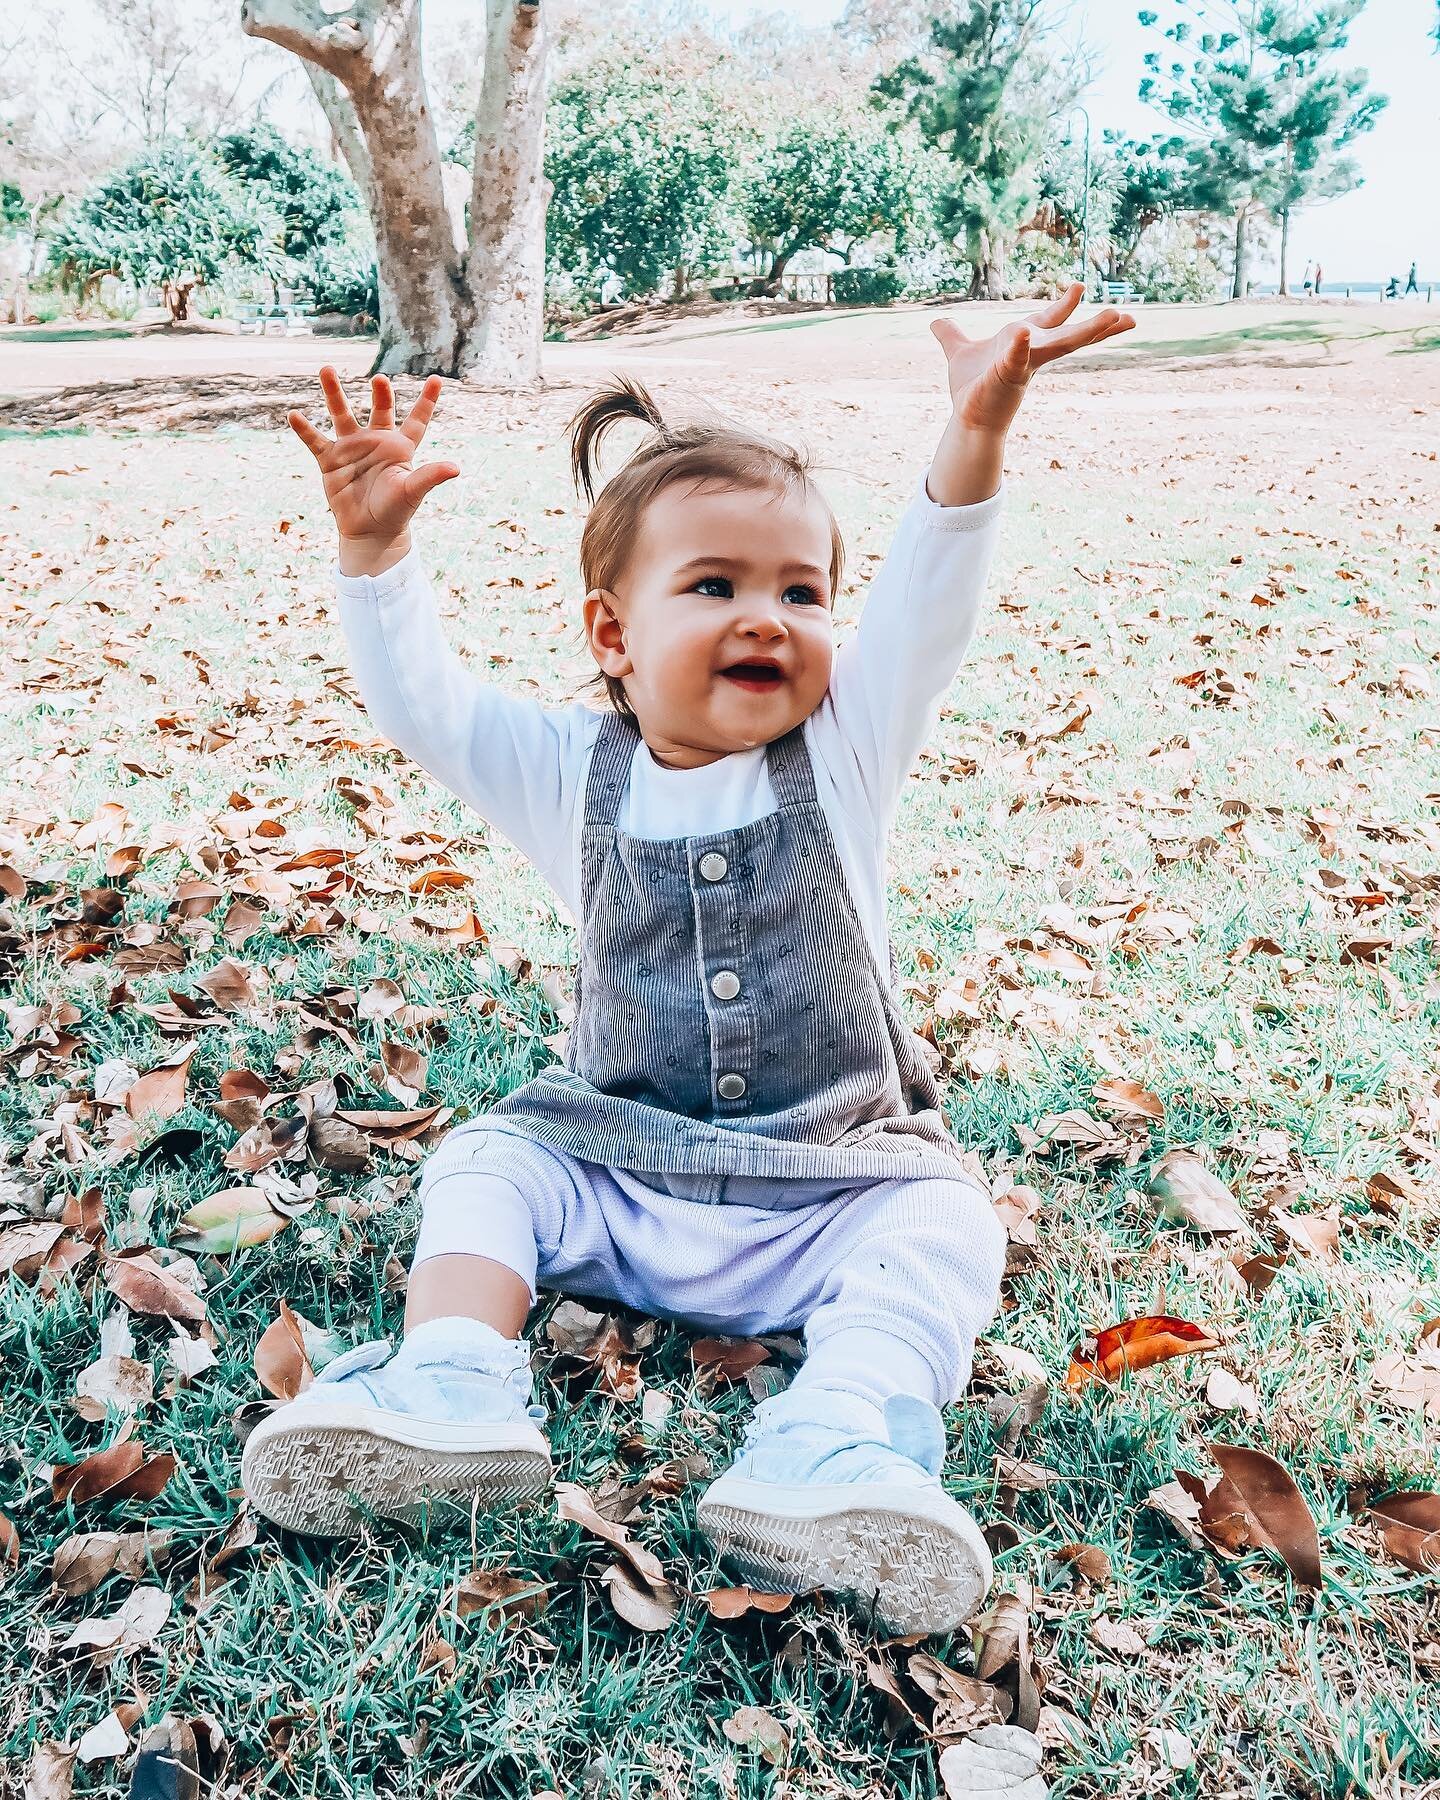 Wind in the air and leaves in her hair 🍂🍃 Swipe to see our little adventurer in her element 😍 One thing I love about babies/toddlers is how inquisitive and adventurous they are. They find beauty and happiness in the little things. They love gettin